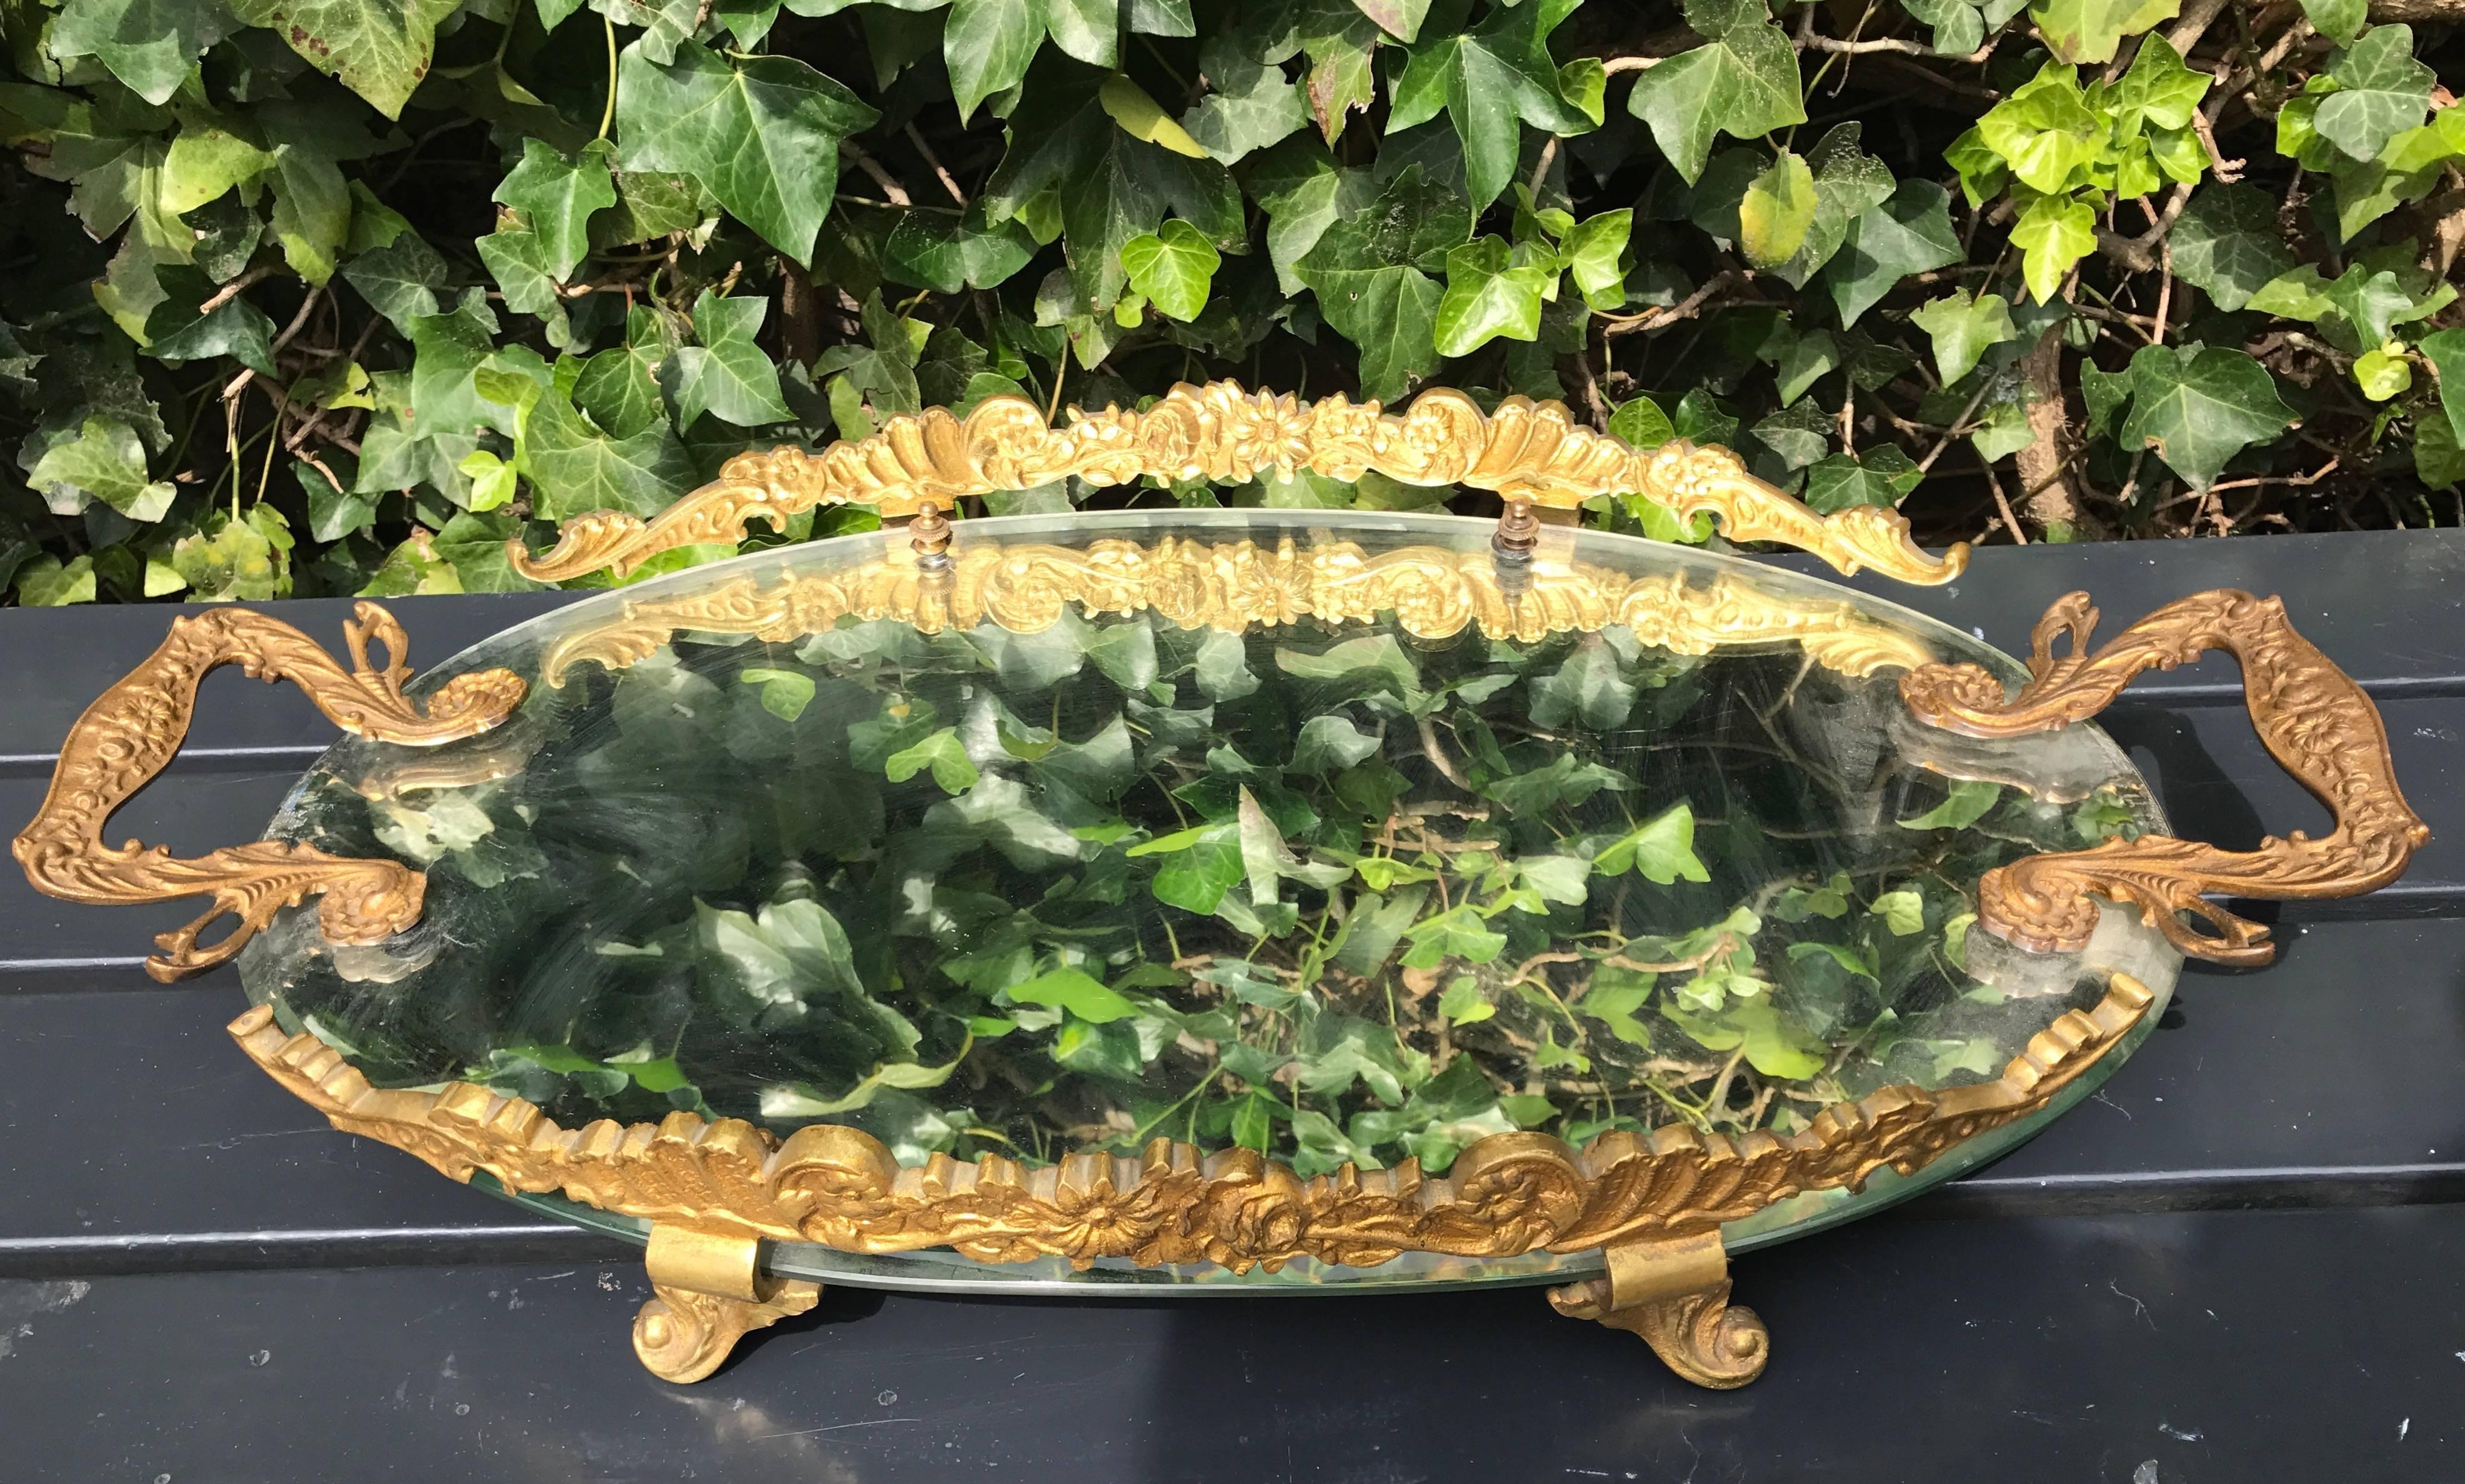 Highly stylish and in great condition. 

This beautiful tray comes with intricate details and an antique, oval mirror forming the base. The thick and heavy bronze ornamentation makes this rare tray extra impressive and a joy to look at. It sits on